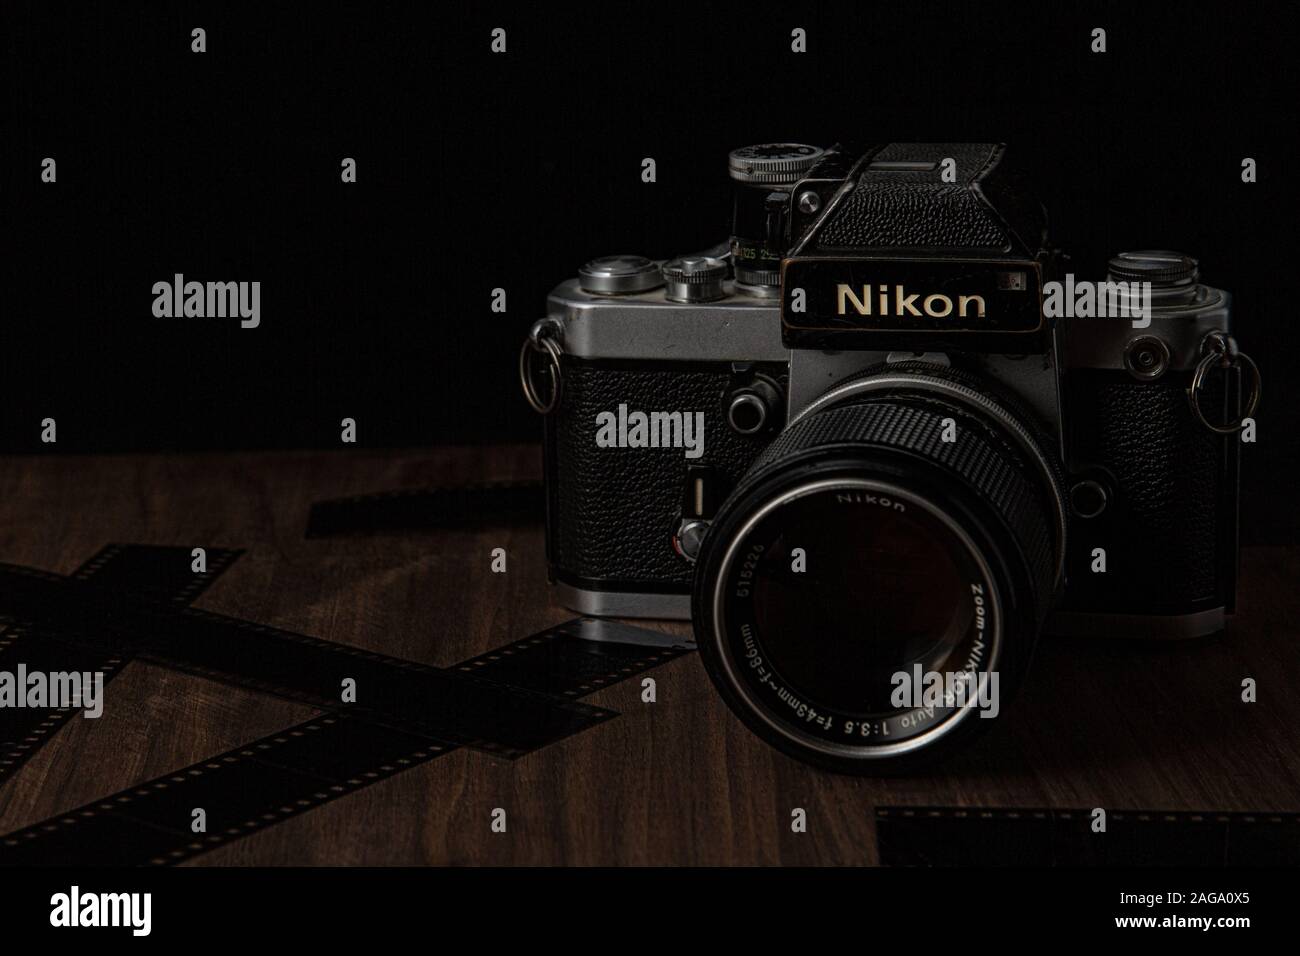 Vintage Nikon film camera on a wooden black background with film lens and camera shot in low key dark style Stock Photo